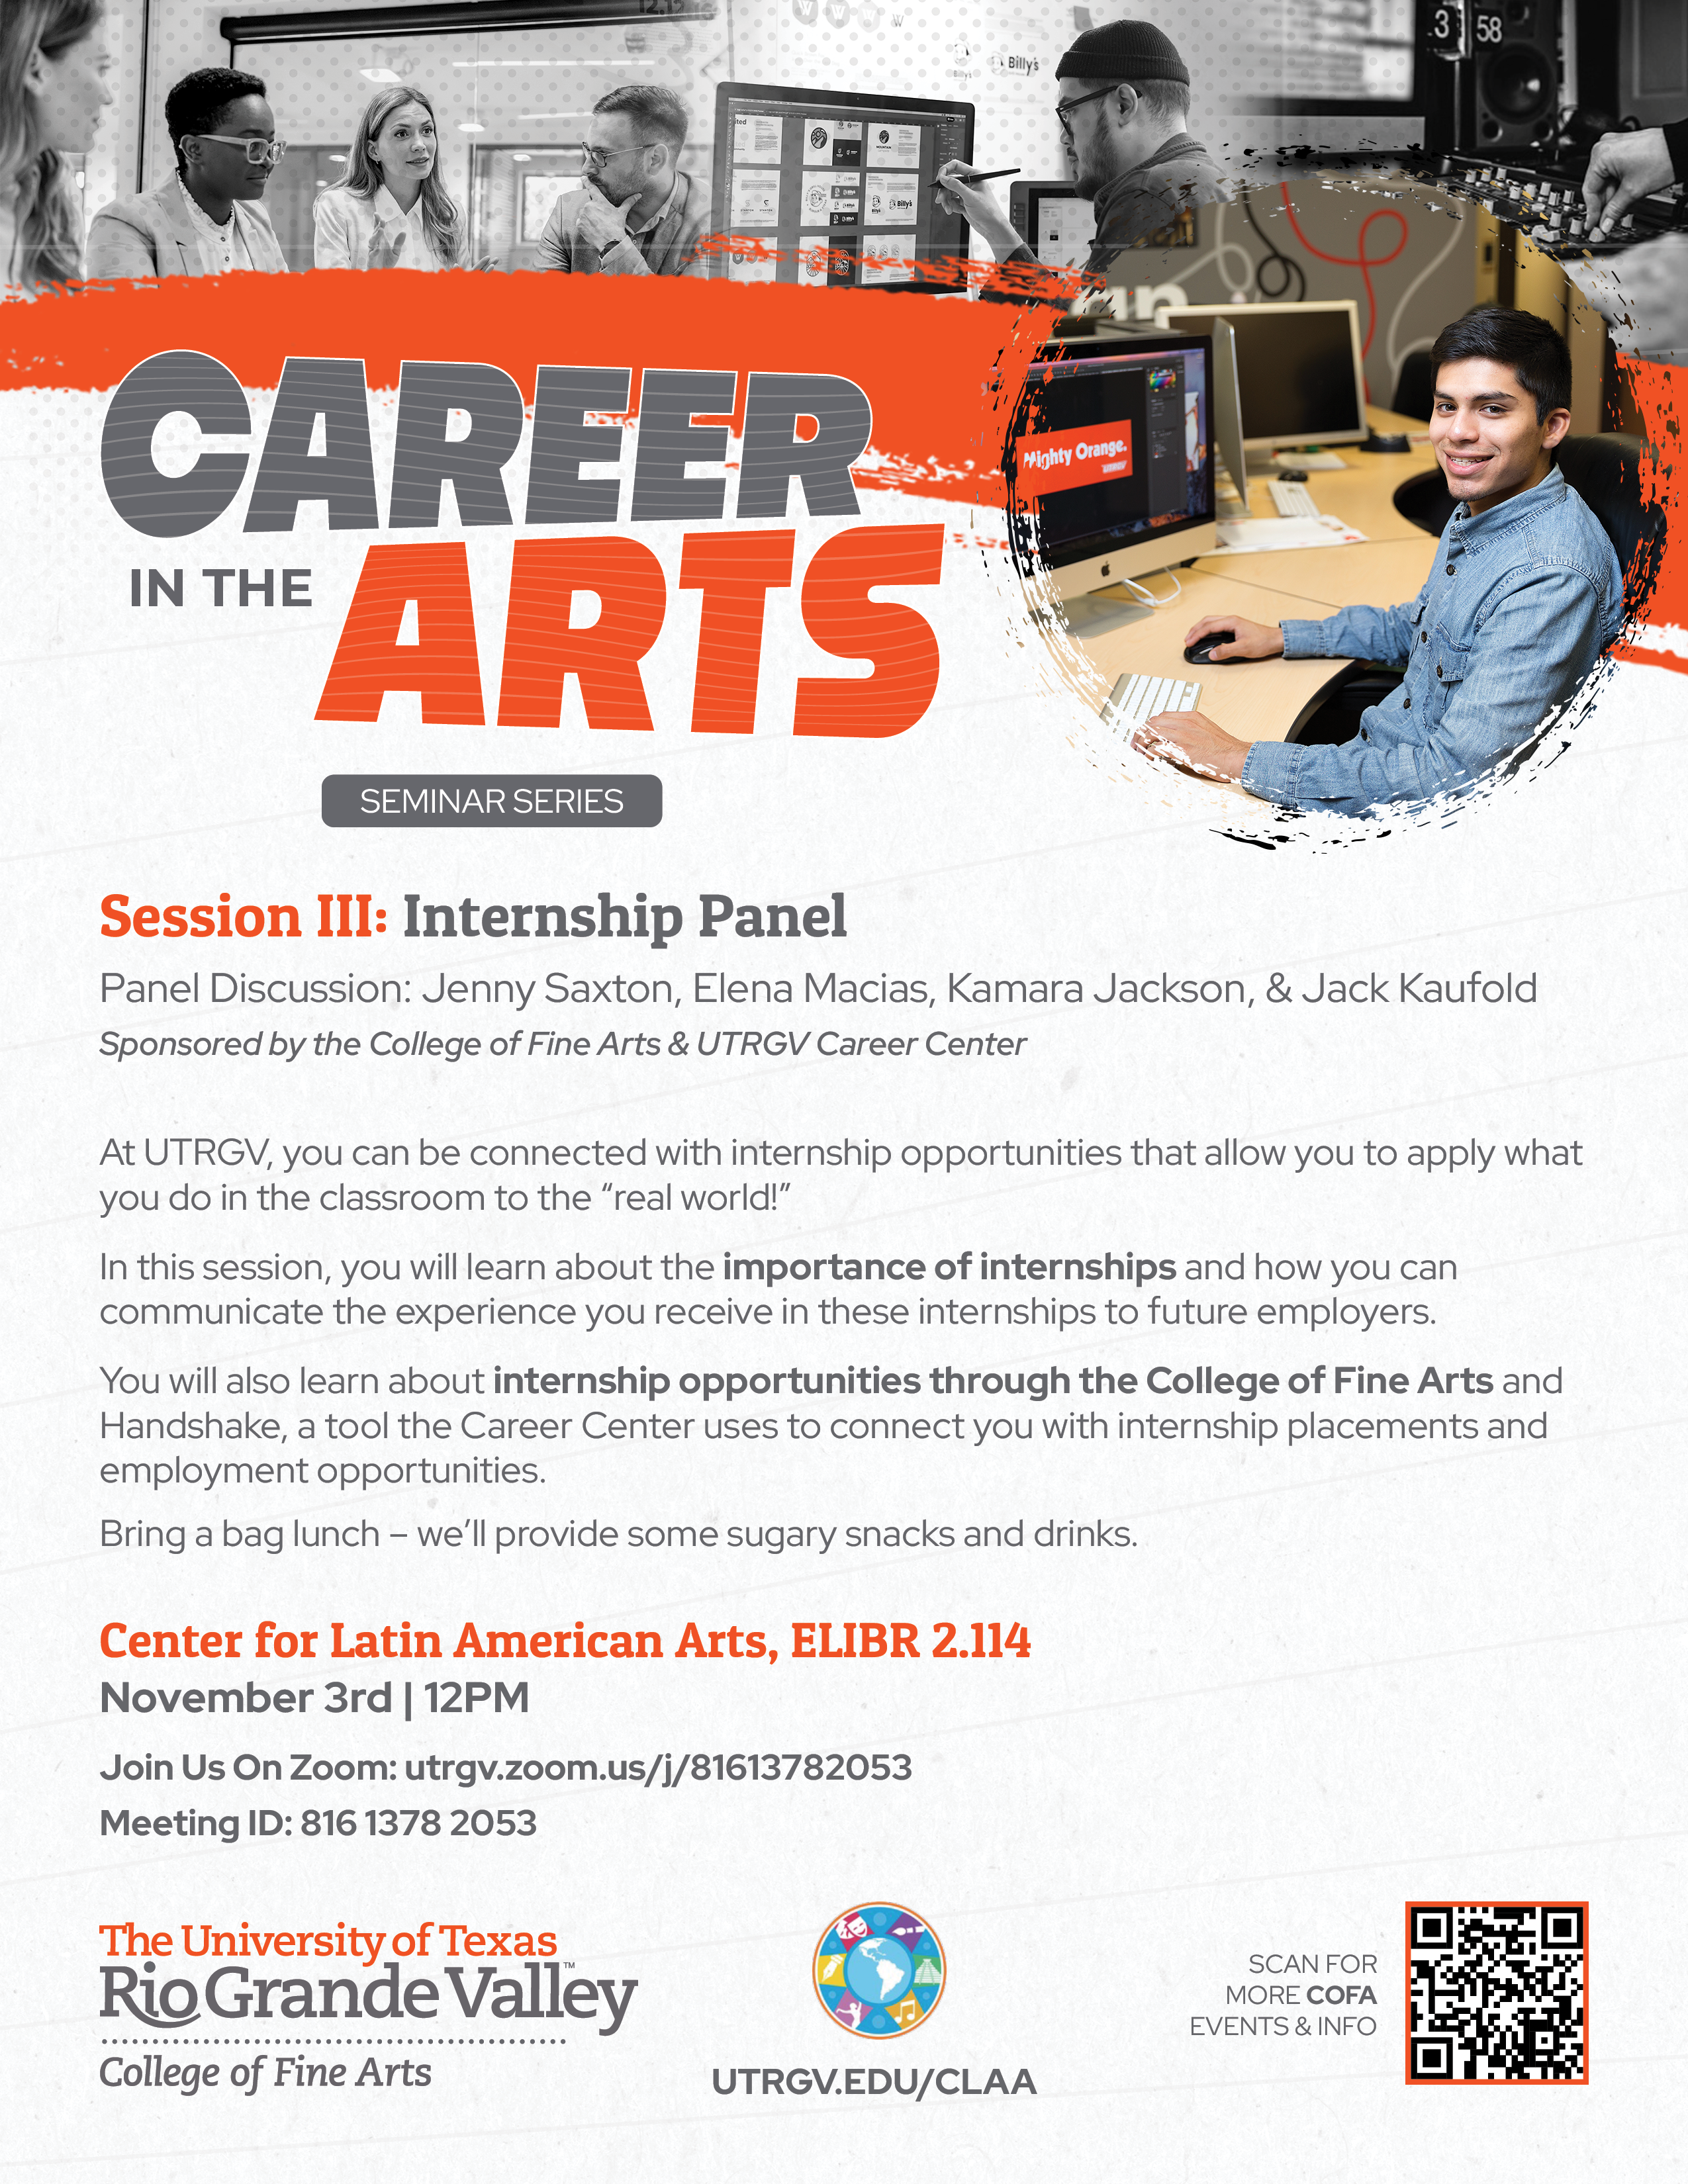 career-in-the-arts-session-iii-internship-panel-flyer.png